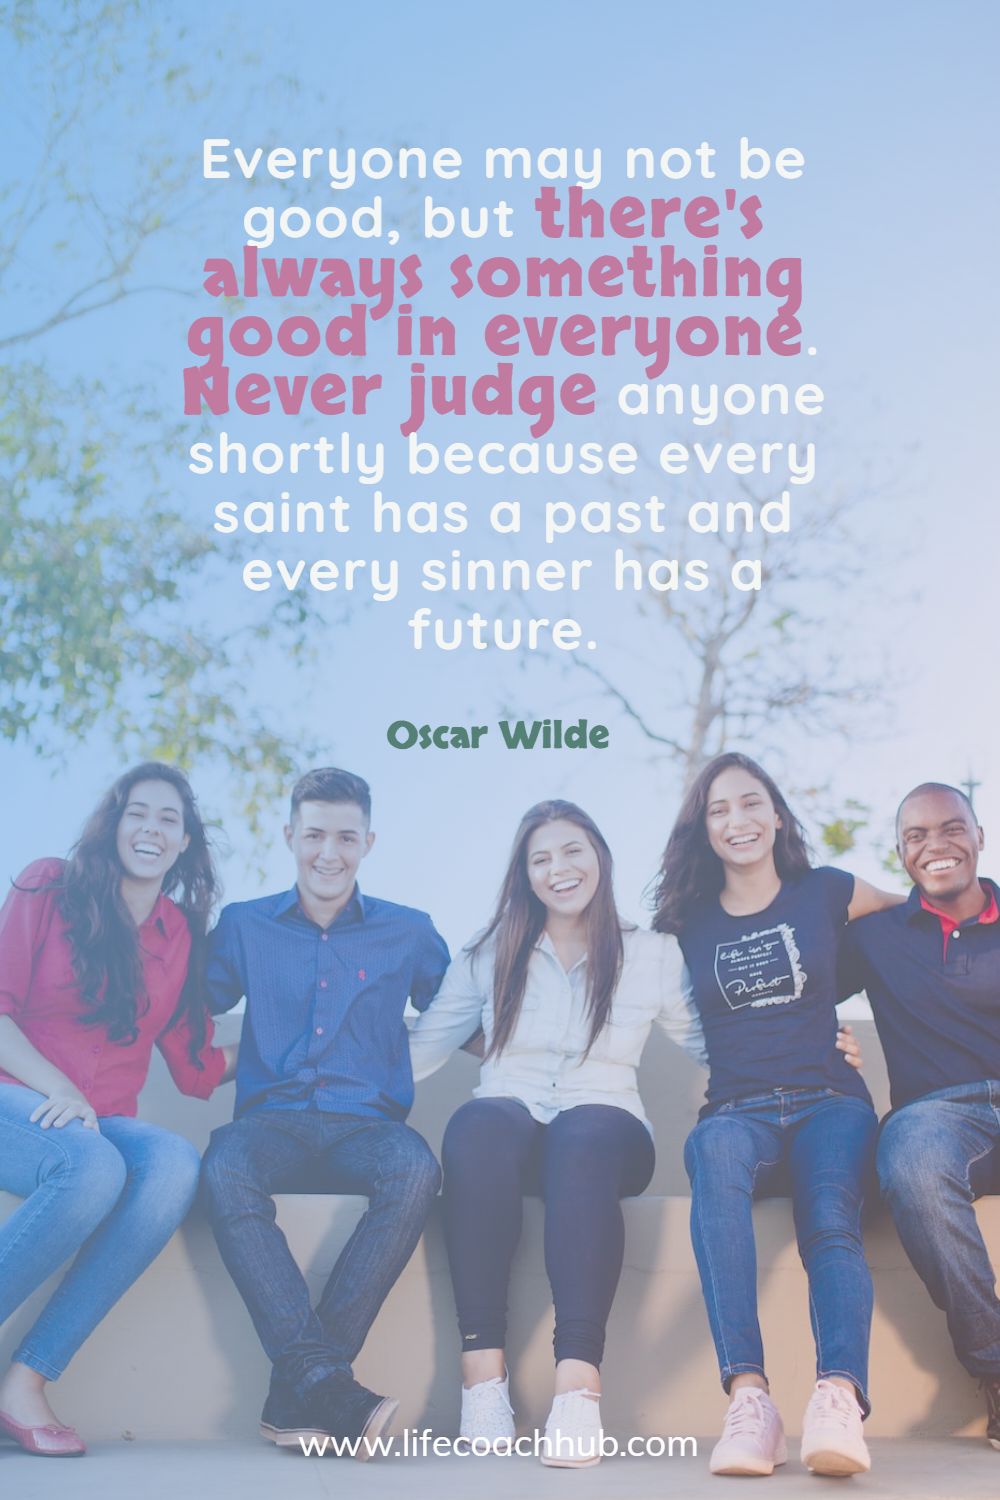 Everyone may not be good, but there's always something good in everyone. Never judge anyone shortly because every saint has a past and every sinner has a future. Oscar Wilde Coaching Quote